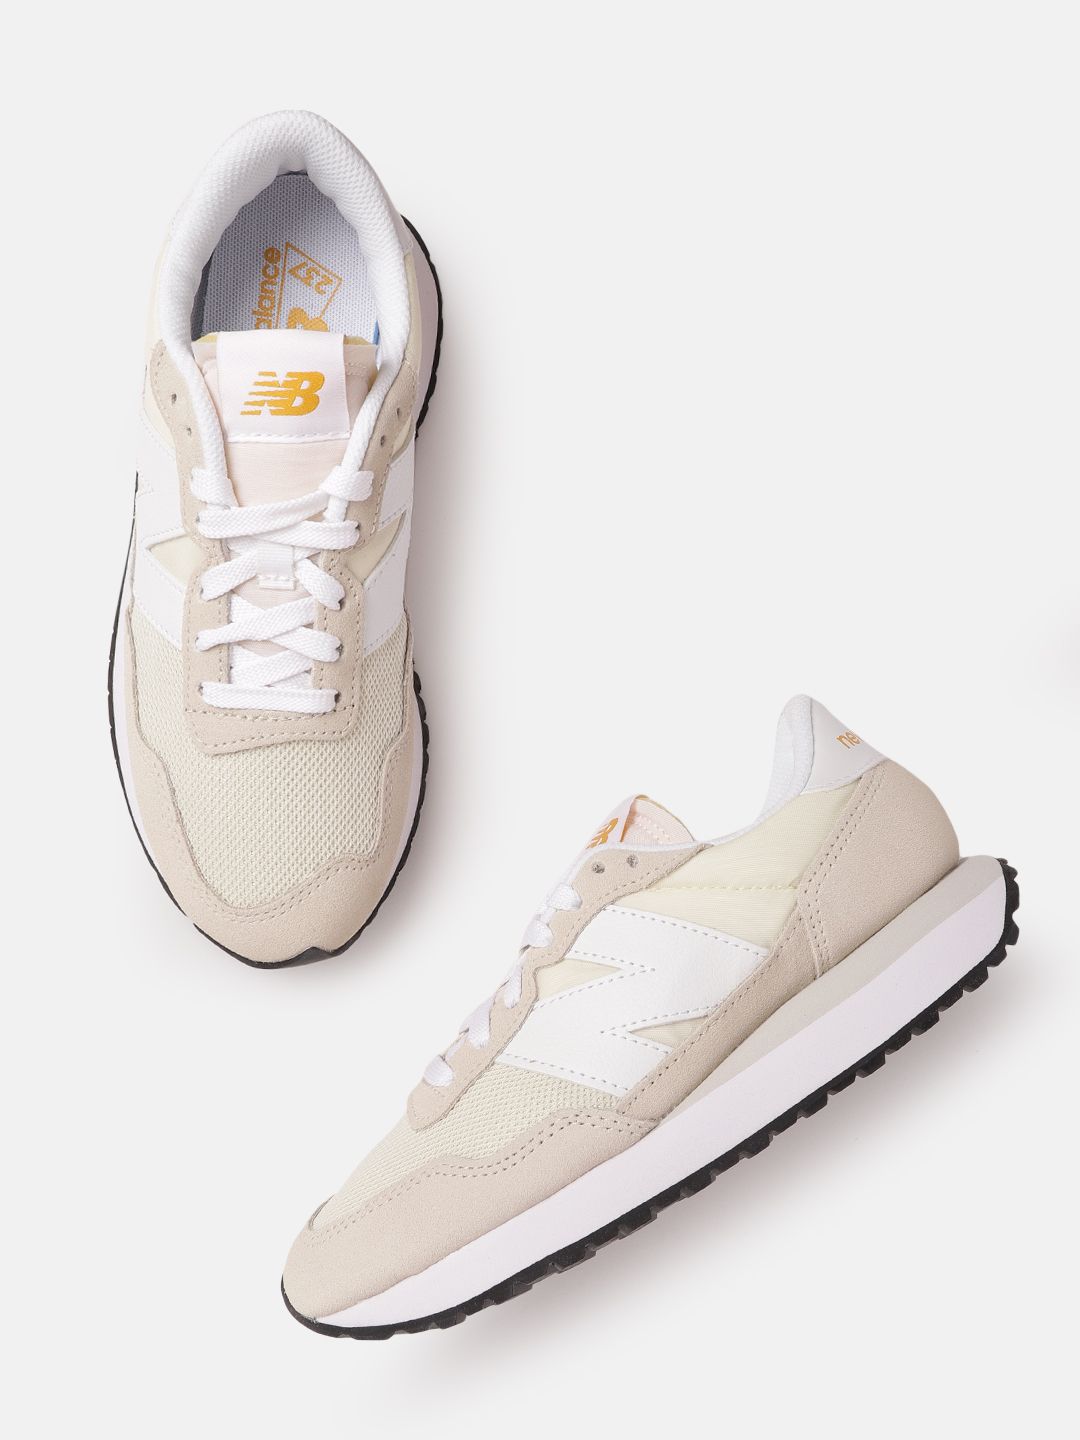 New Balance Women Cream-Coloured Solid Sneakers Price in India